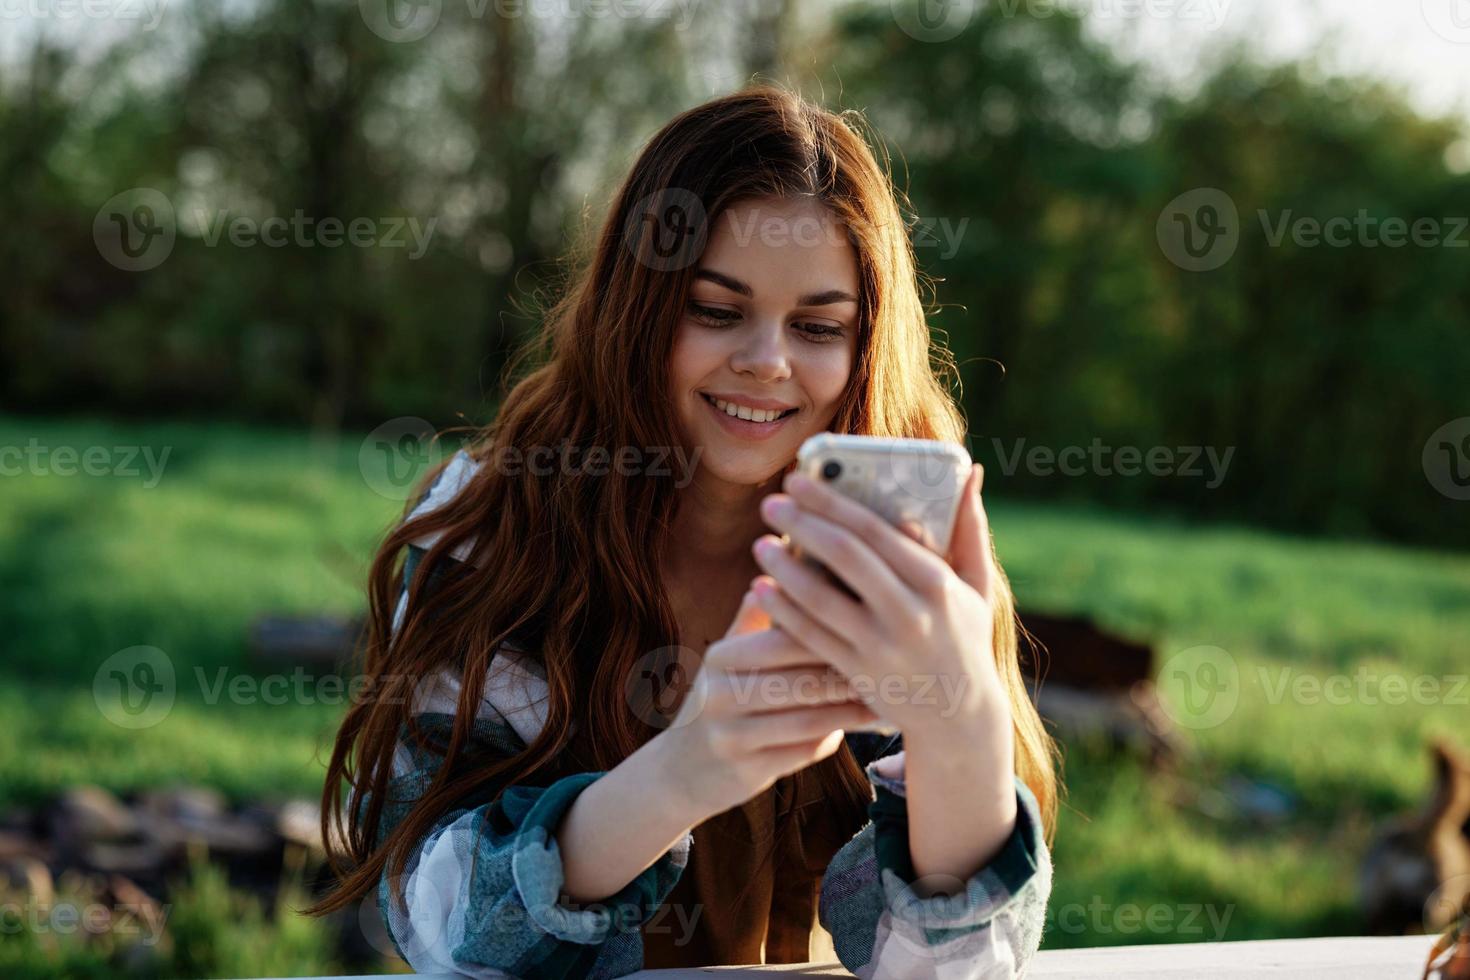 A beautiful woman relaxing and working on her phone sitting in nature in the park among the trees smiling and holding her smartphone in her hand lit by the bright sunset light photo